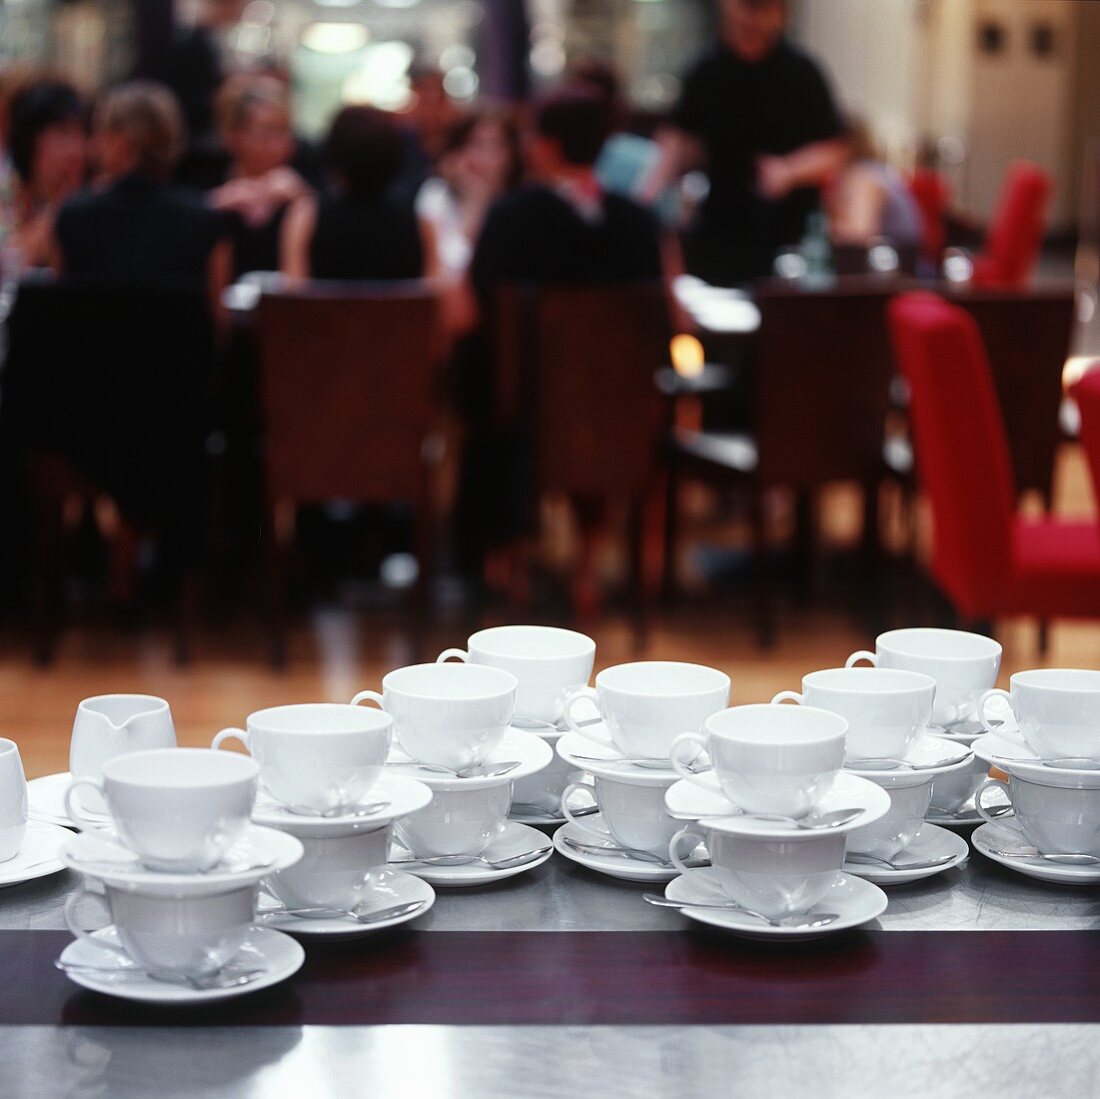 Many coffee cups on a table at a party